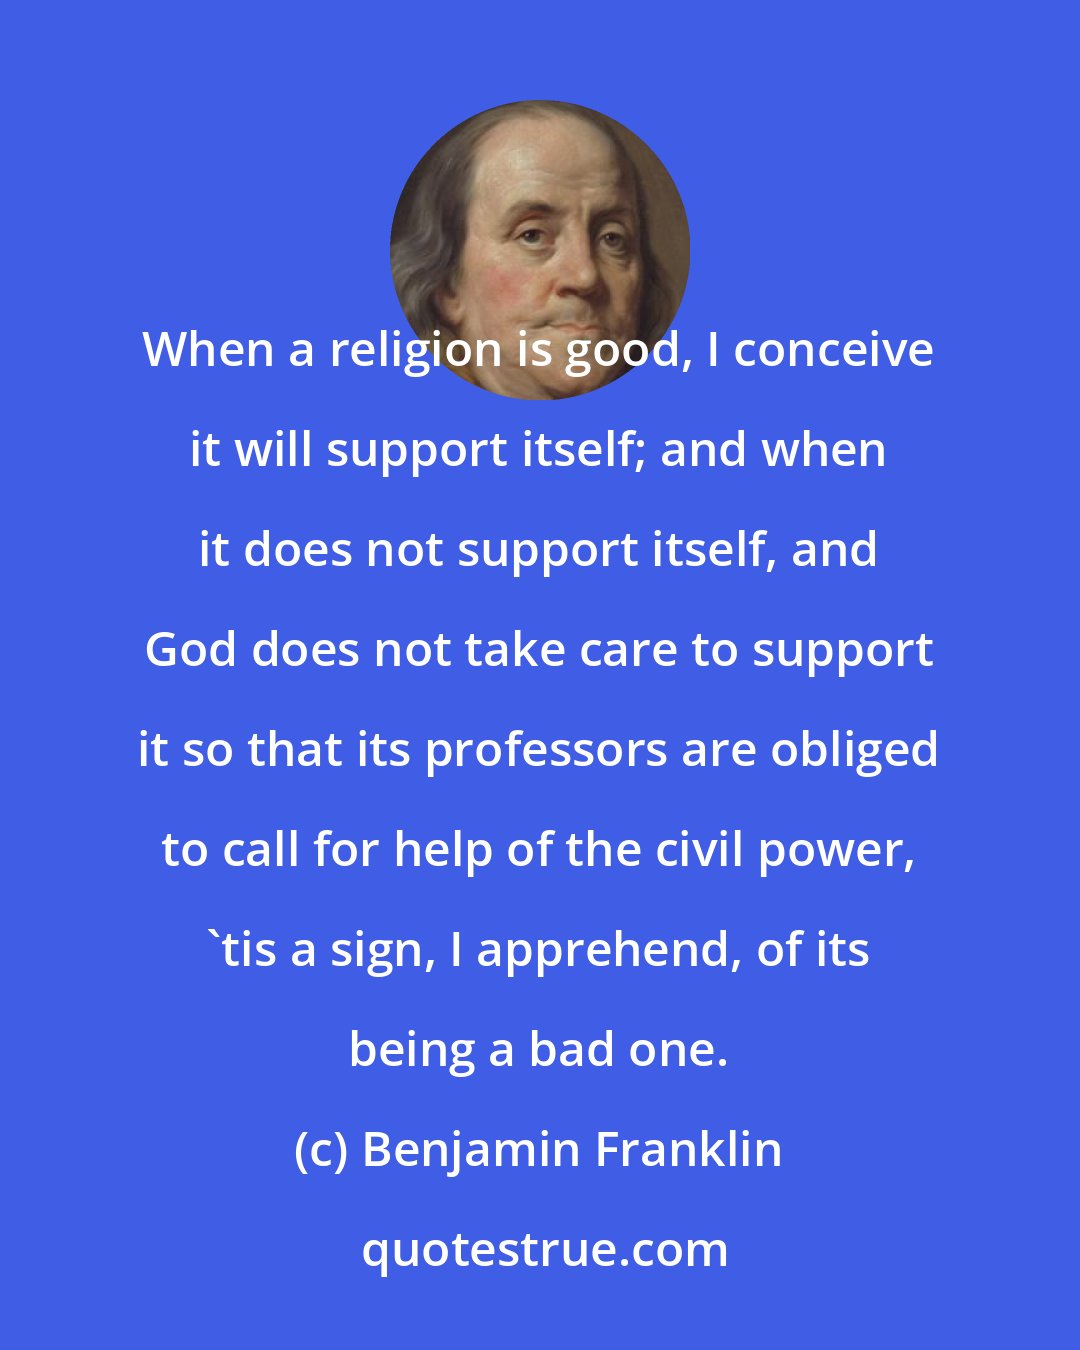 Benjamin Franklin: When a religion is good, I conceive it will support itself; and when it does not support itself, and God does not take care to support it so that its professors are obliged to call for help of the civil power, 'tis a sign, I apprehend, of its being a bad one.